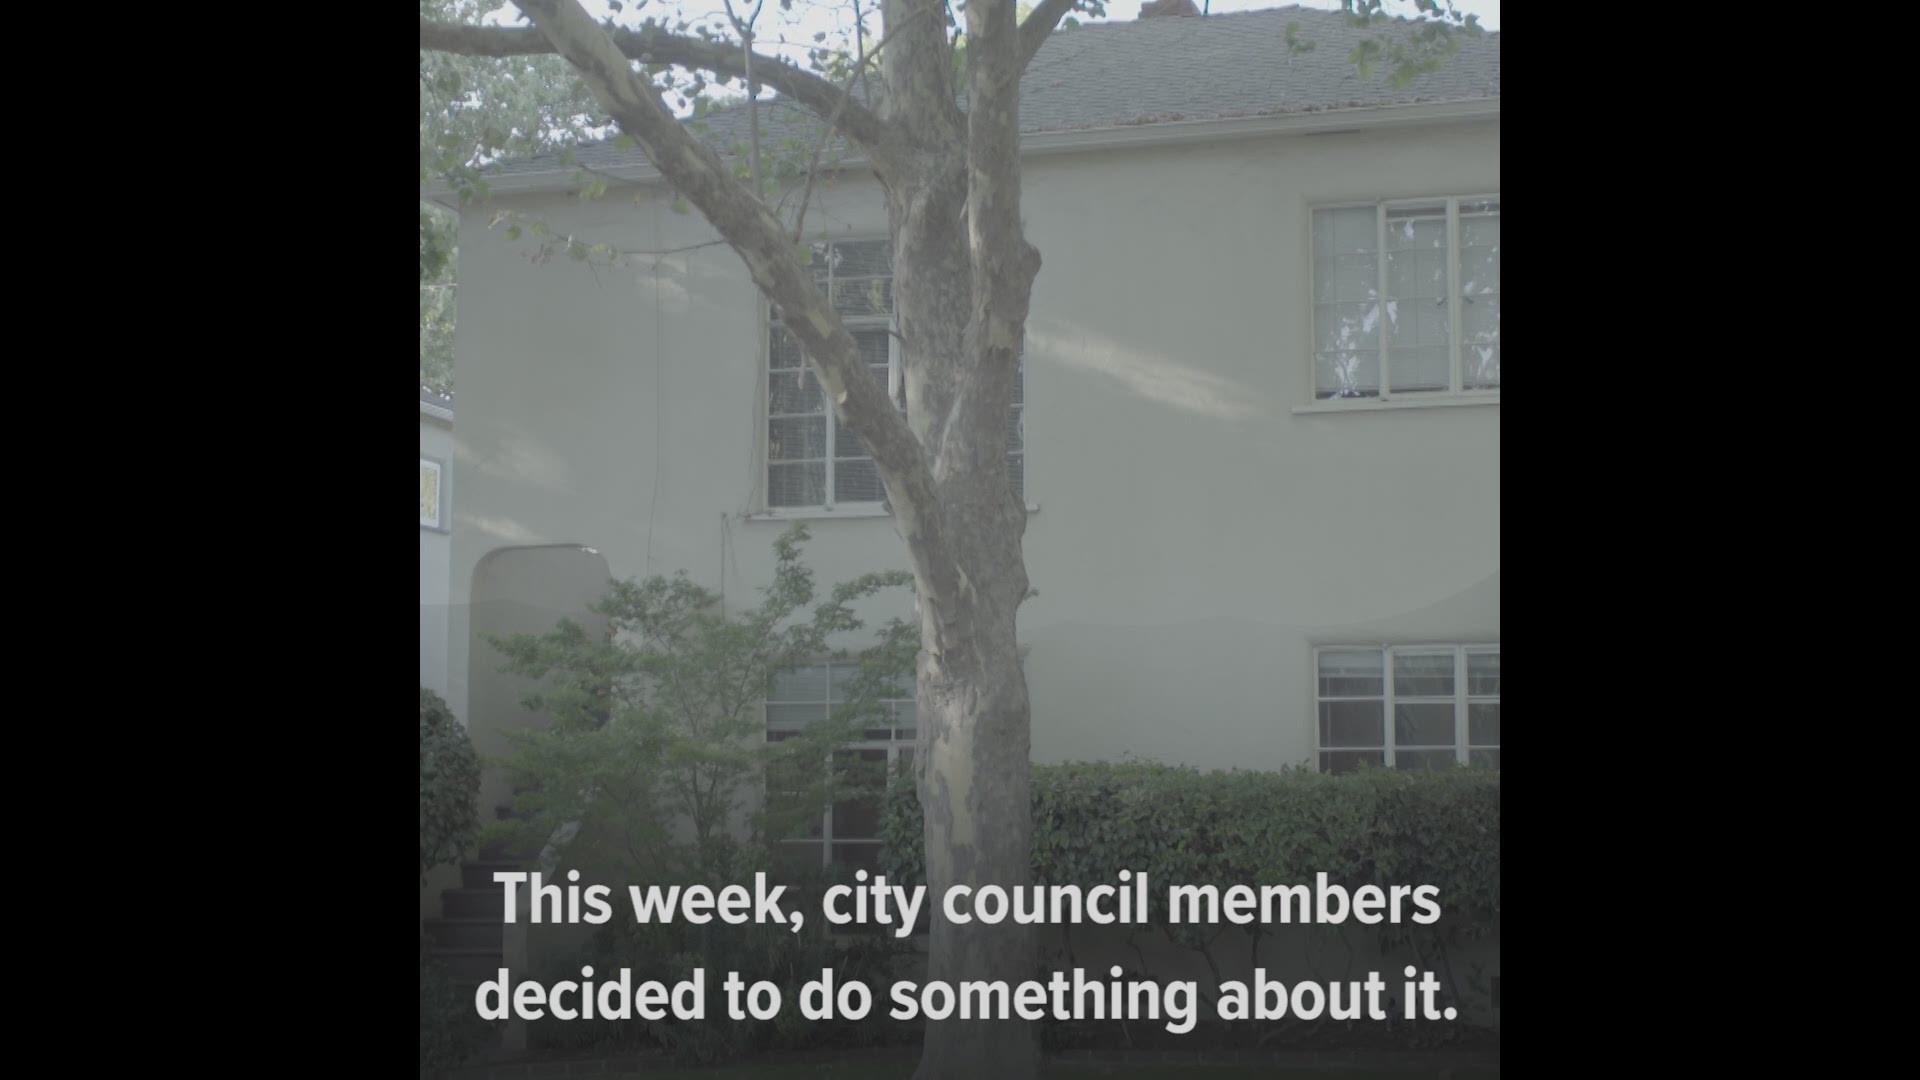 The city of Sacramento is moving forward on housing, with nearly all city council members voting "yes" on a rent control ordinance that will prevent rent gouging and unfair evictions at the Tuesday council meeting.